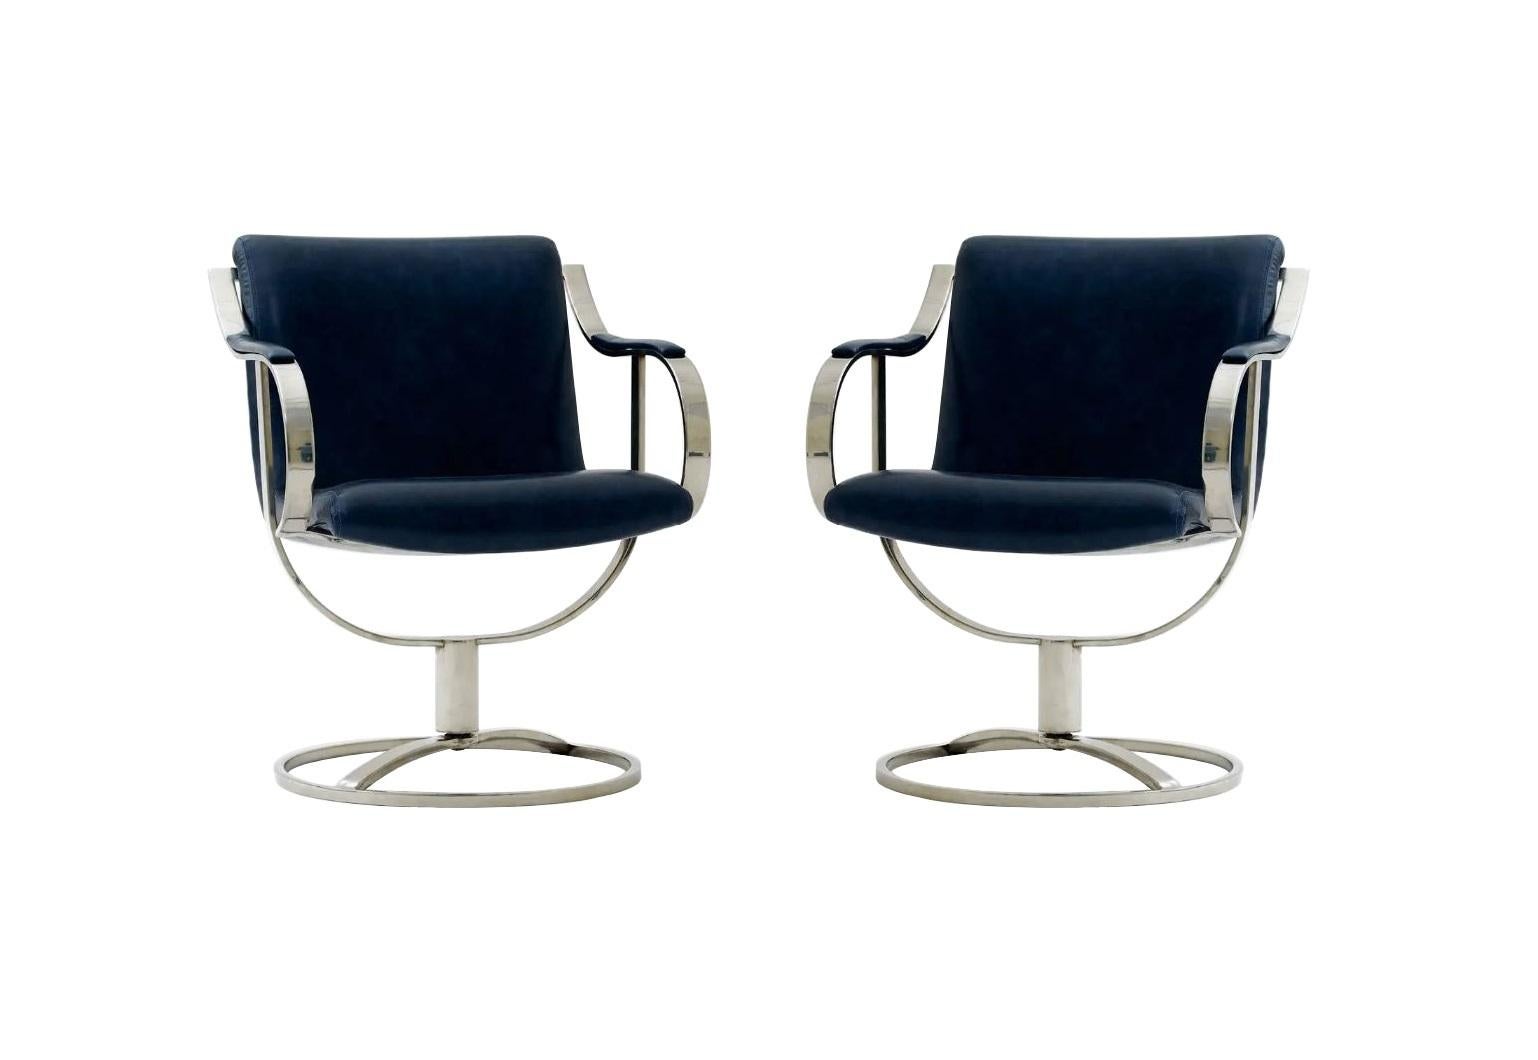 A pair of well constructed side/guest chairs model 455-211 designed by Gardner Leaver, manufactured by the Steelcase Furniture company. Refreshingly modern the bold, curved design and chrome-plated steel sculptural frames gives these swivel chairs a